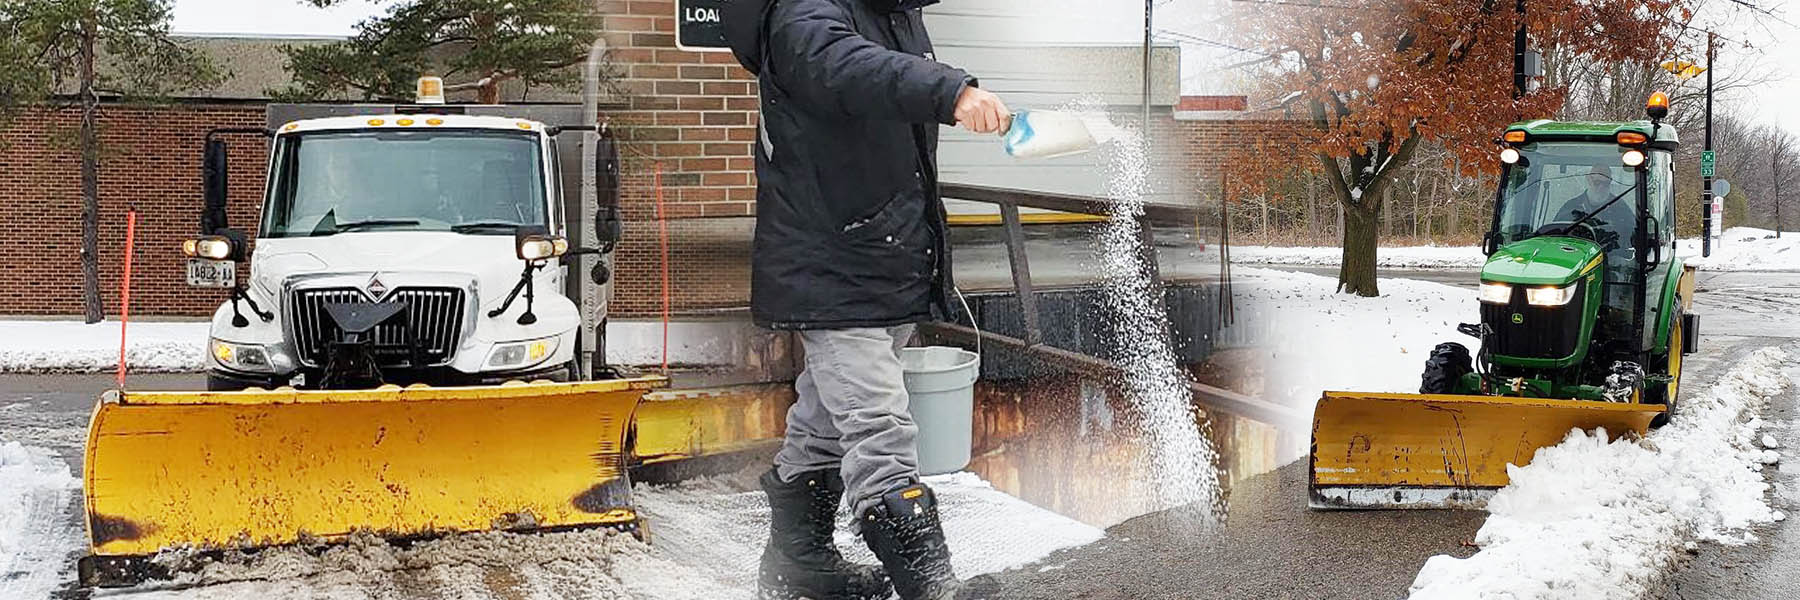 image shows two snowplows and a man sprinkling salt on an icy walkway